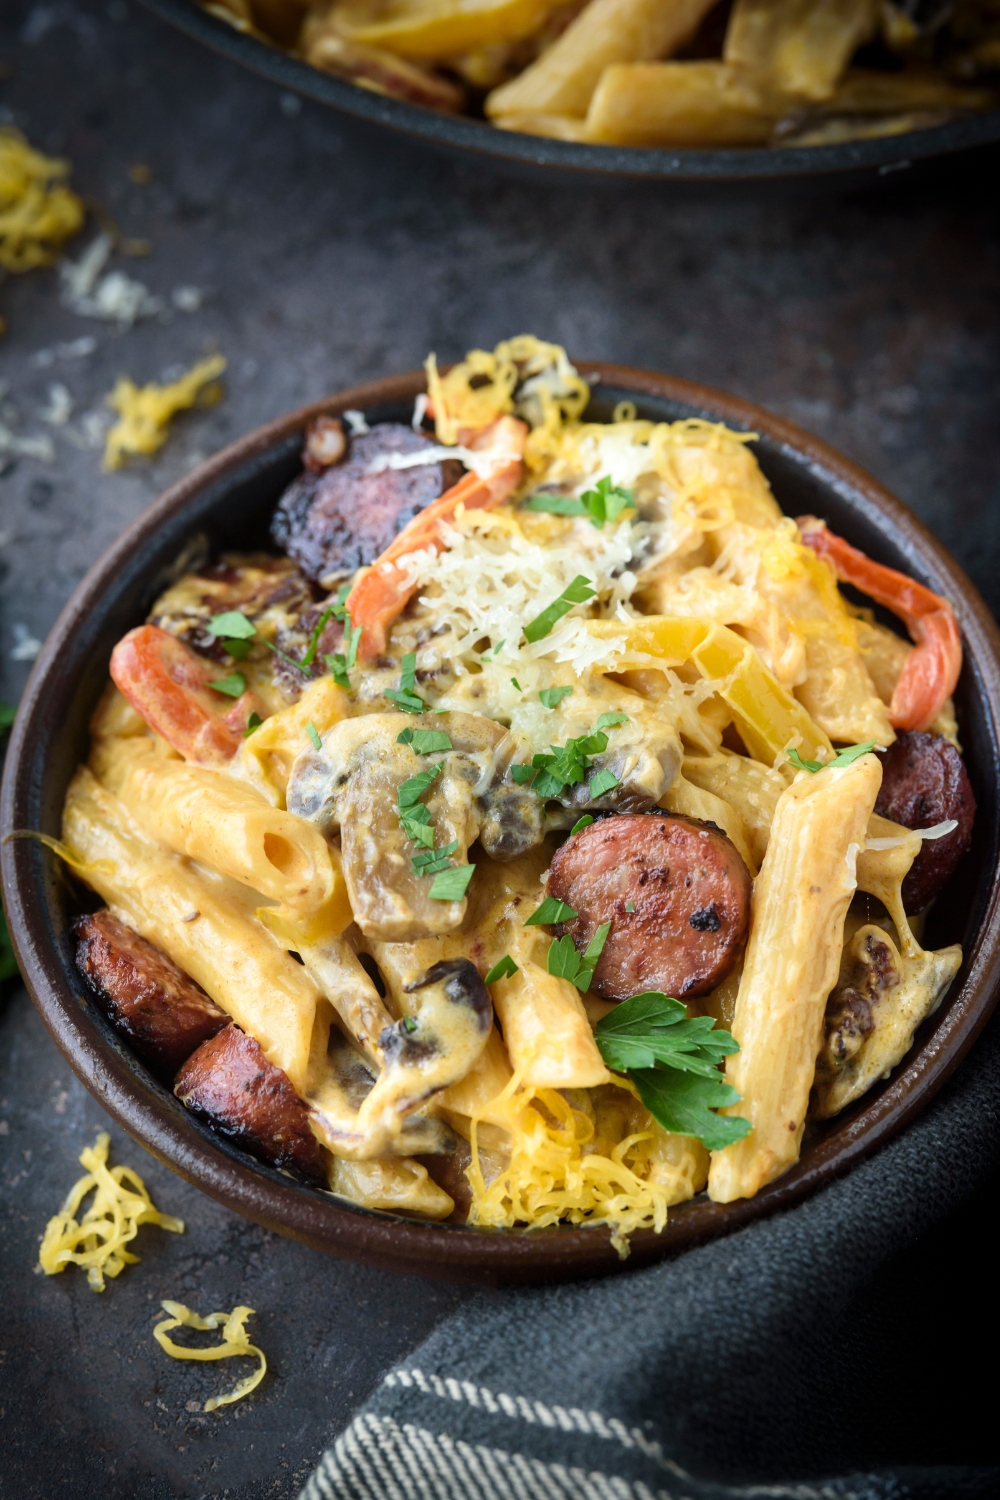 A bowl of pasta in a seasoned cream sauce with sliced sausages, red peppers, yellow peppers, shredded cheese, and fresh herbs on top.